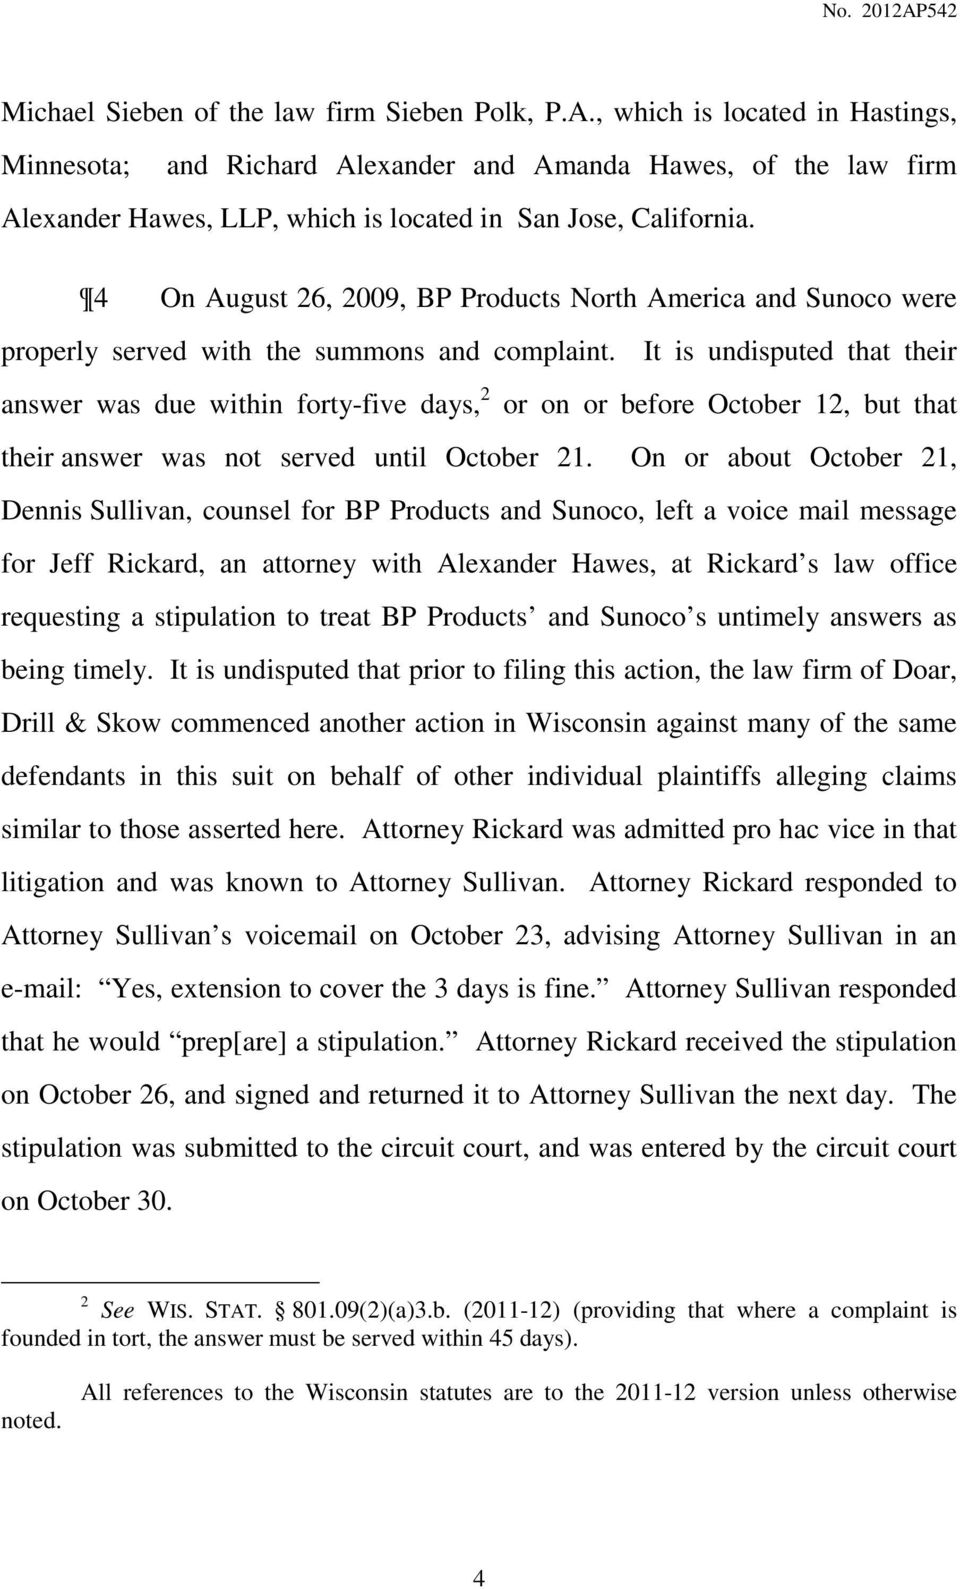 4 On August 26, 2009, BP Products North America and Sunoco were properly served with the summons and complaint.